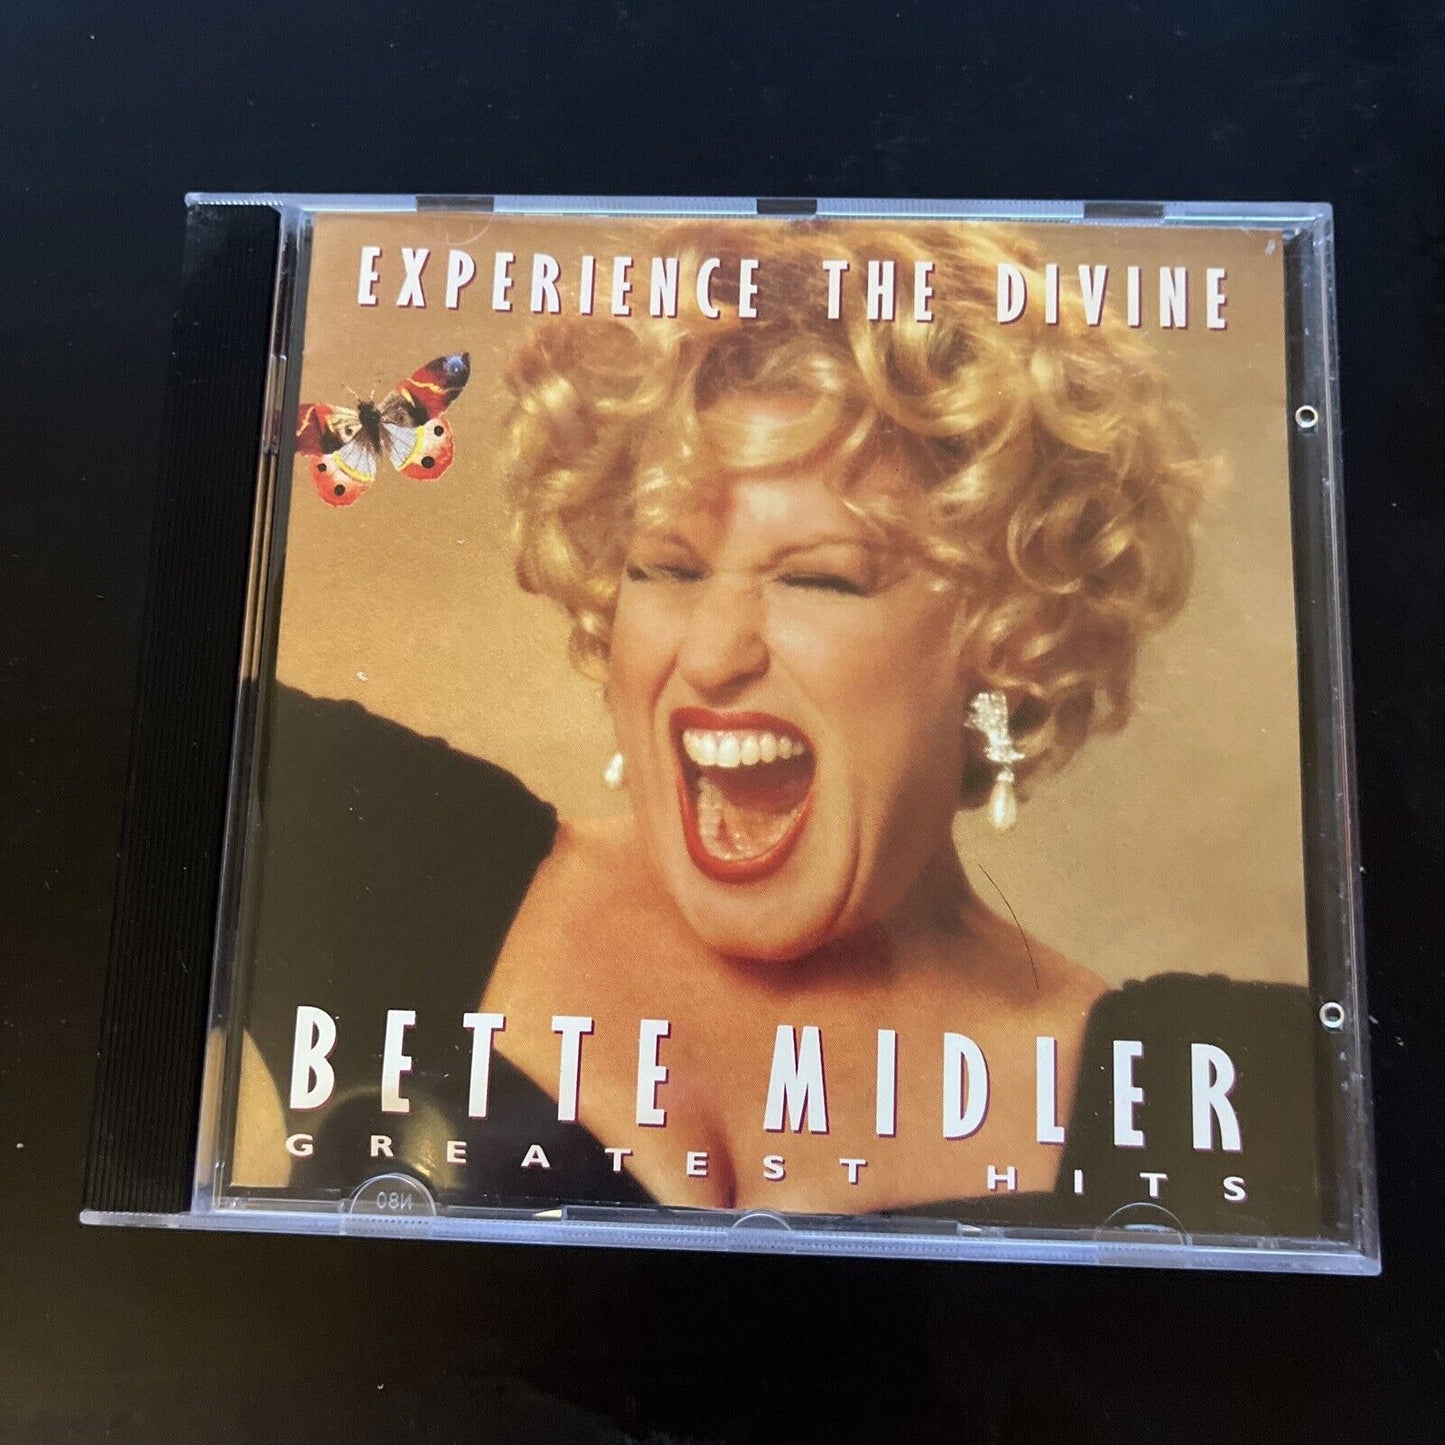 Bette Midler - Experience the Divine Bette Midler: Greatest Hits (CD, 1993)